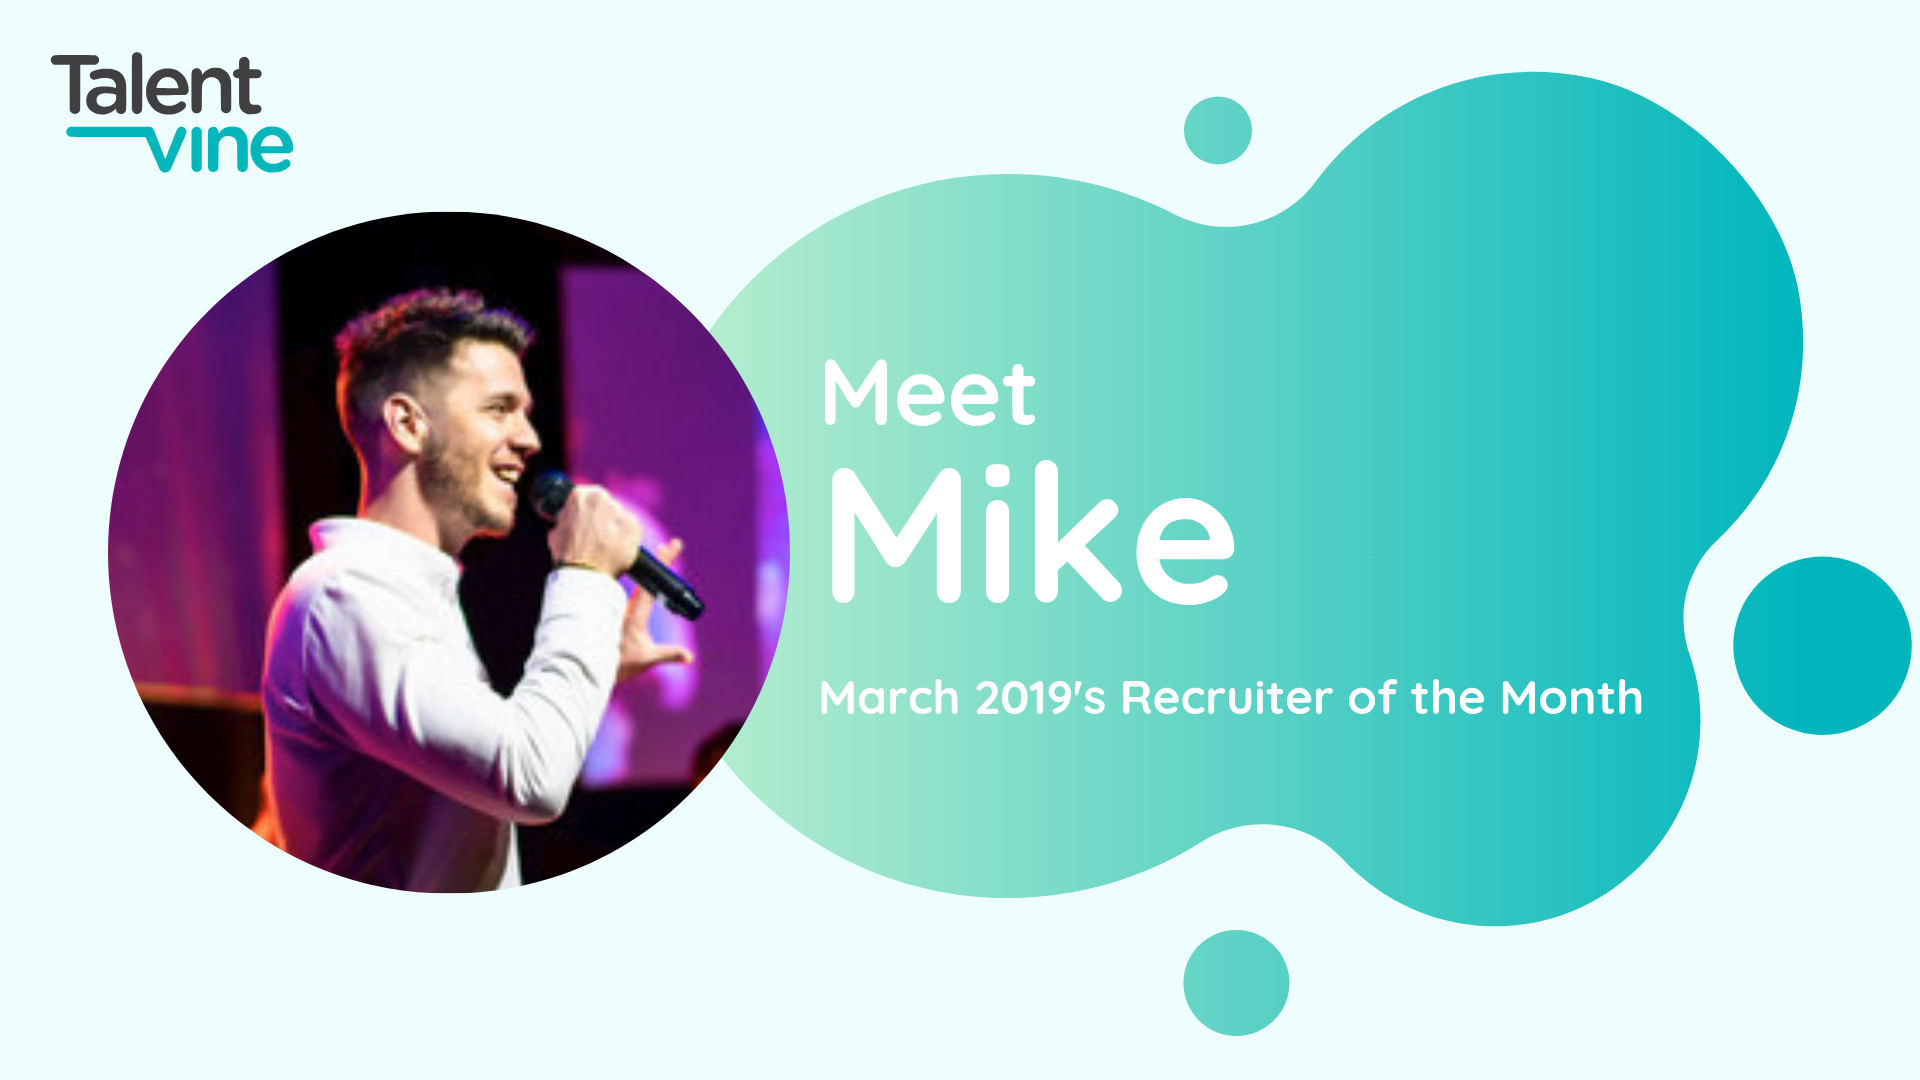 Meet Mike - TalentVine March 2019's Recruiter of the Month